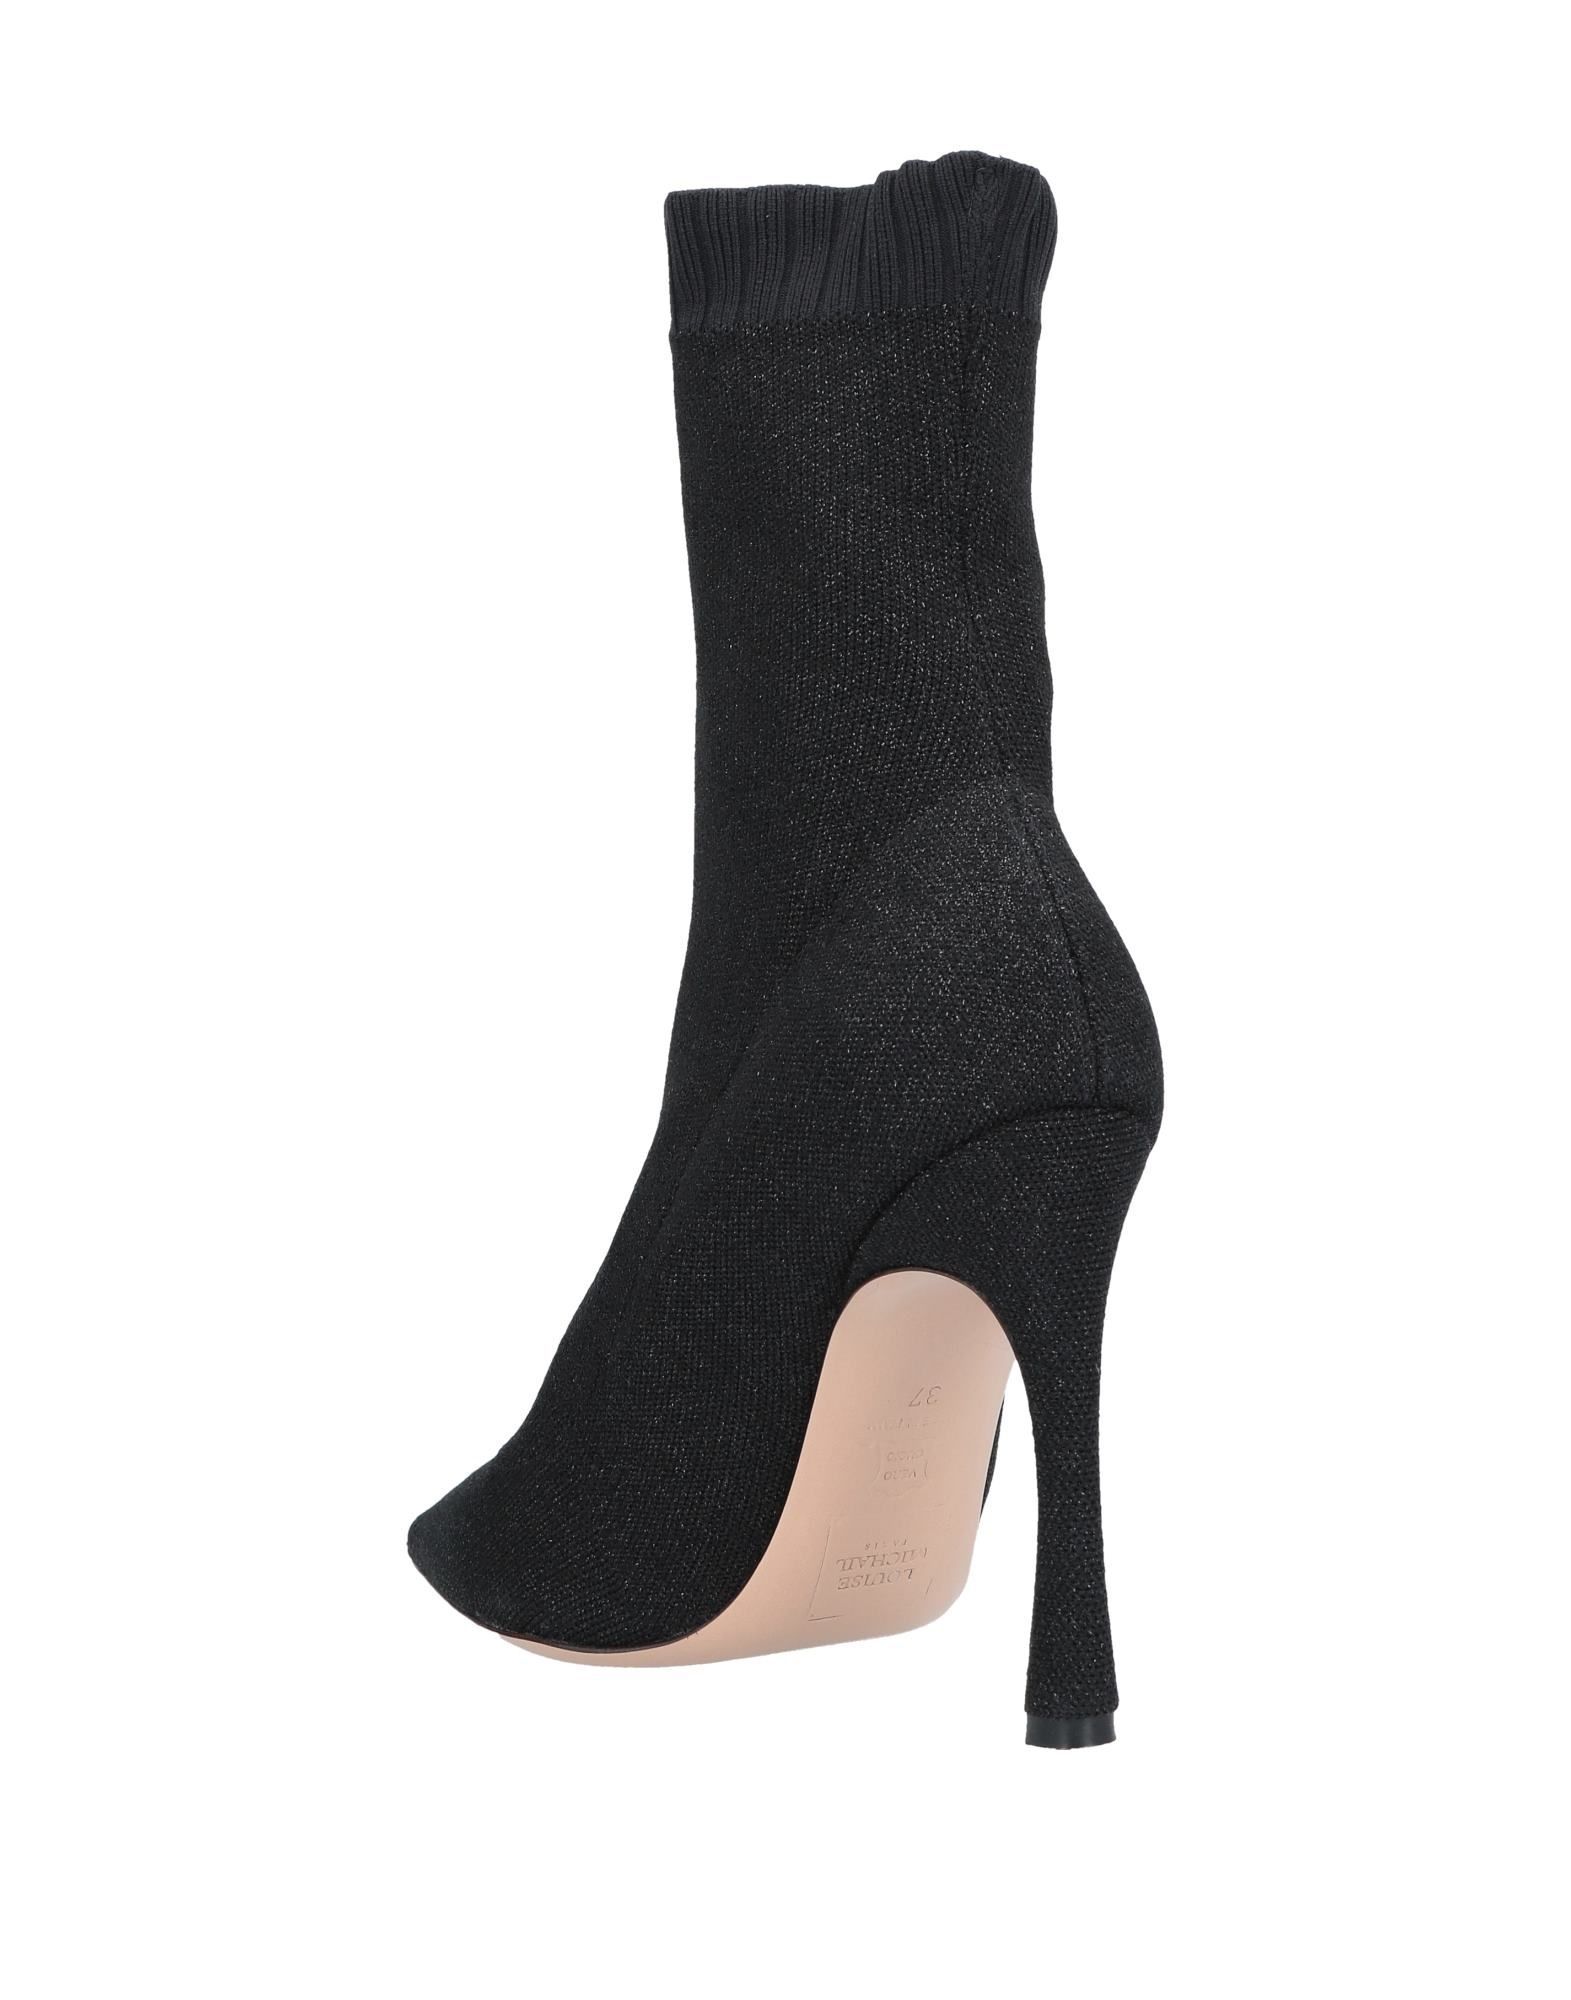 knitted, lamé, no appliqués, solid colour, narrow toeline, stiletto heel, leather lining, leather/rubber sole, contains non-textile parts of animal origin